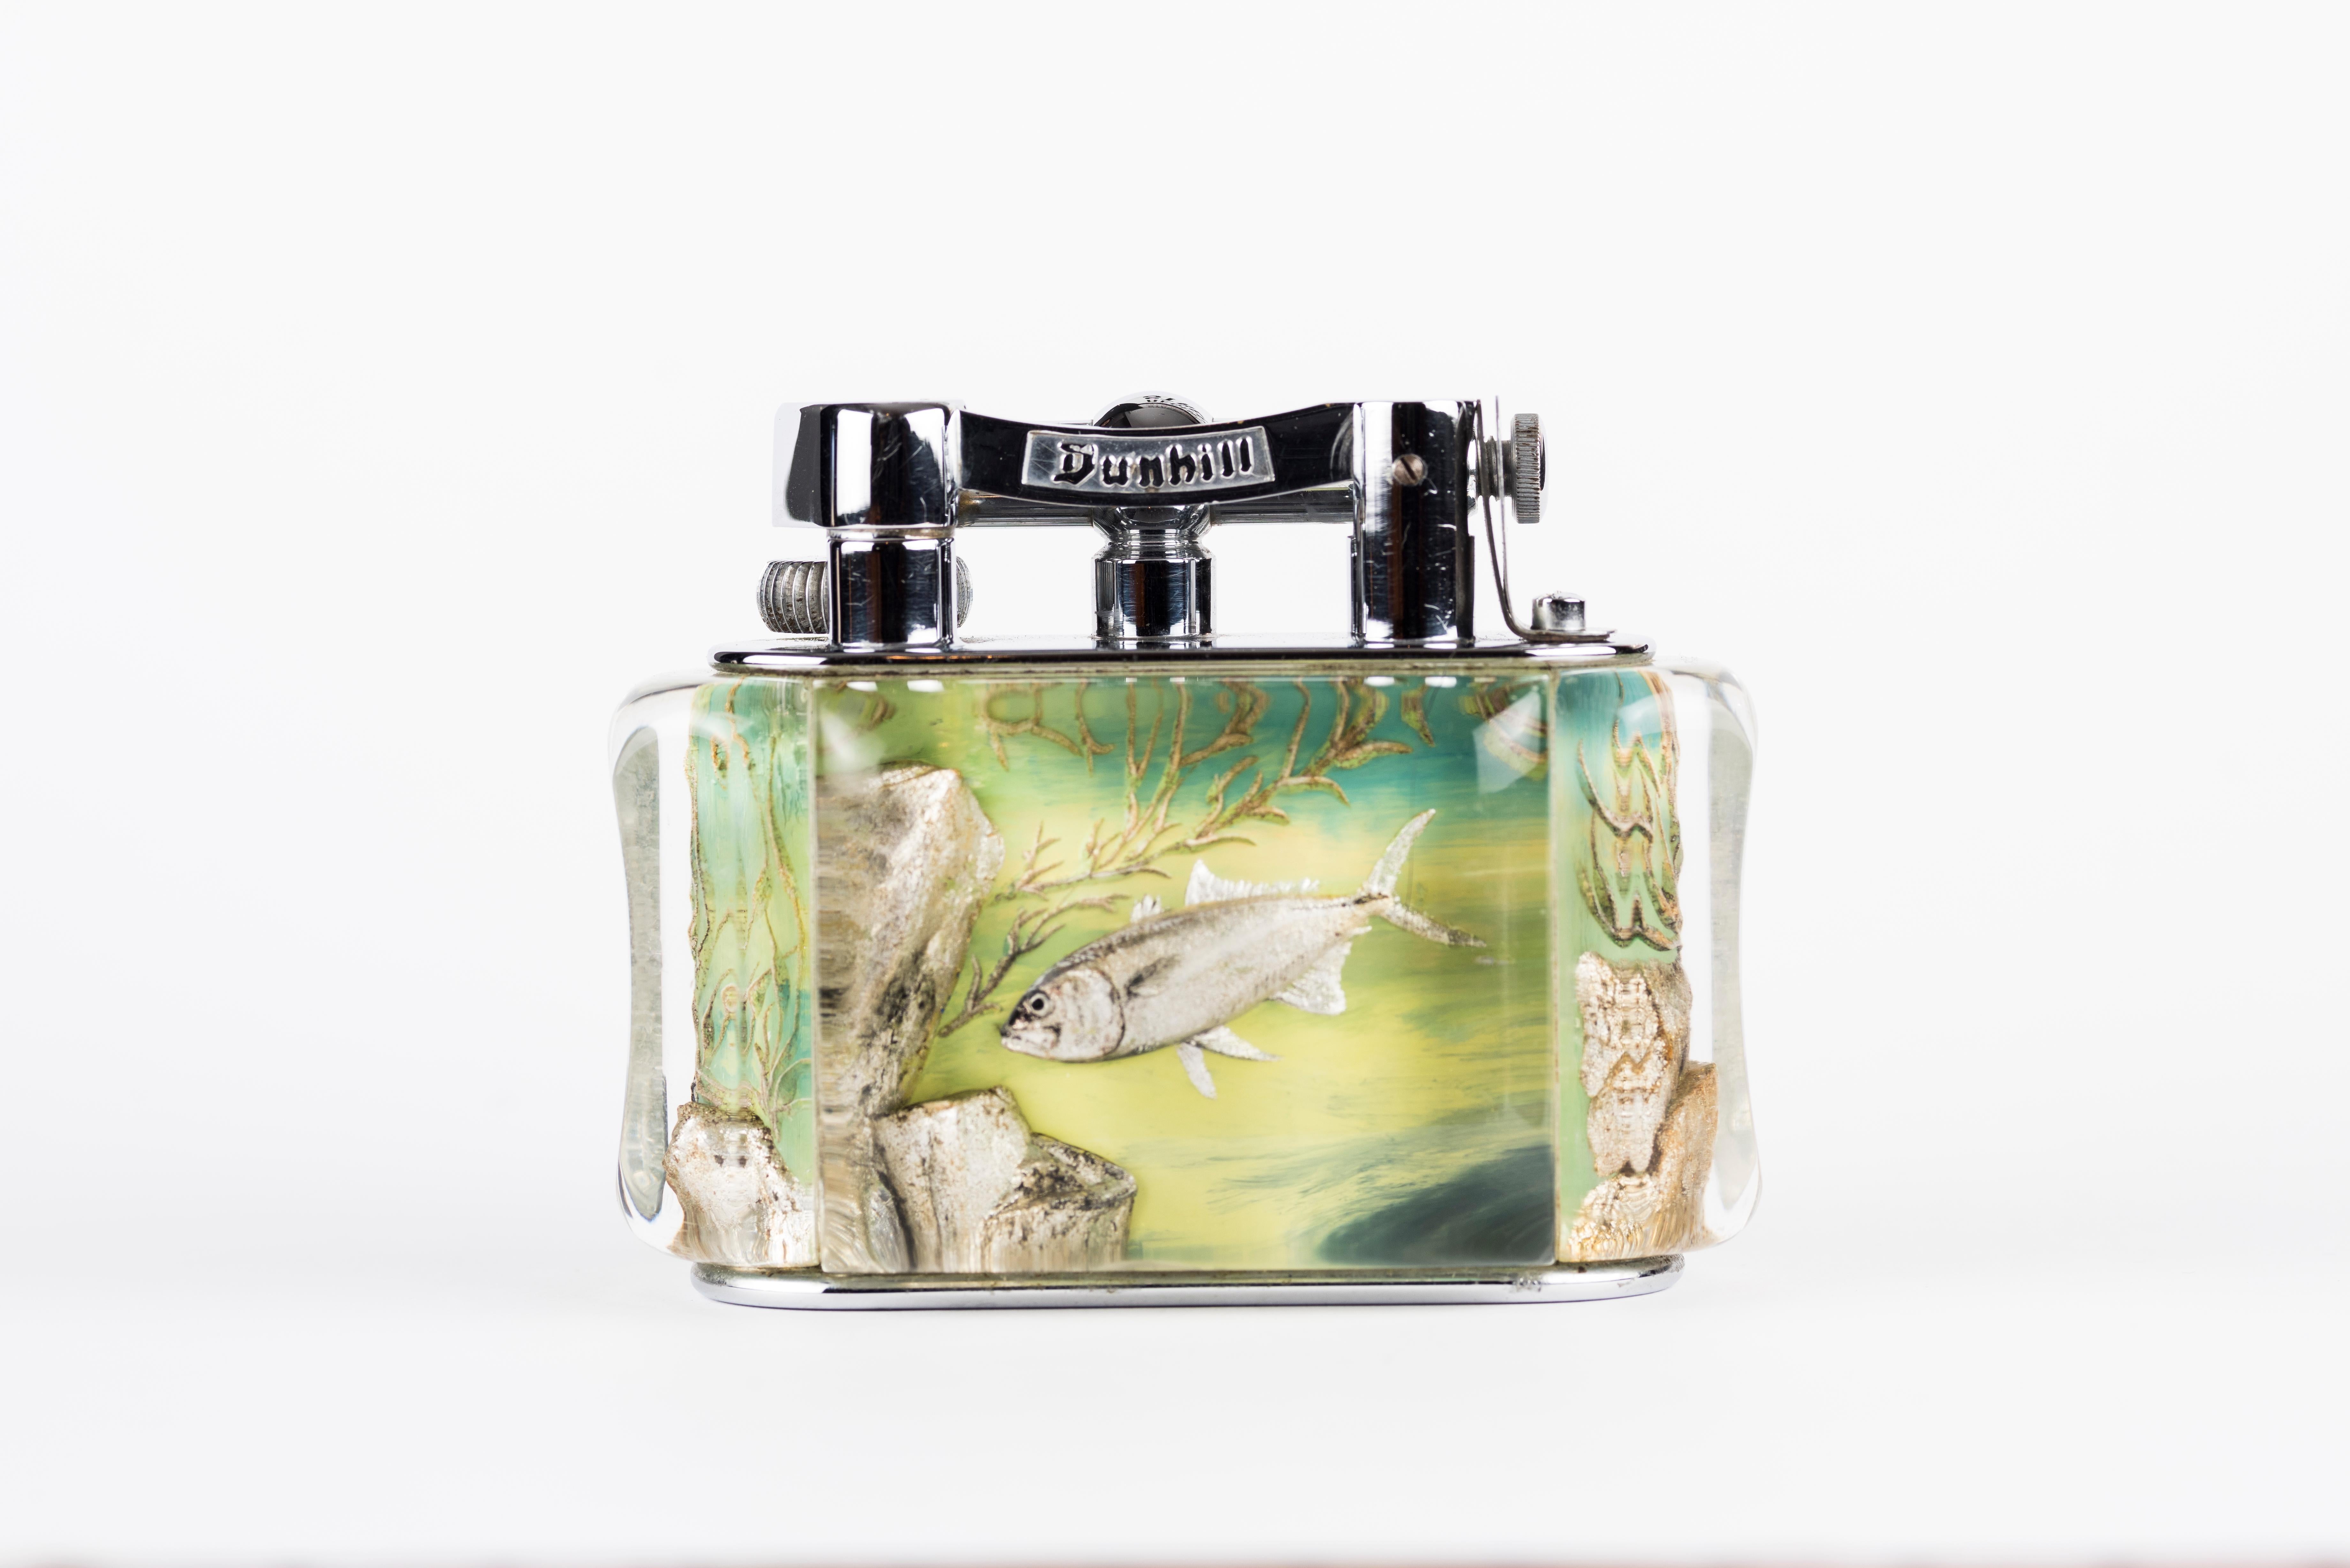 A rare 1950s Half-Giant Dunhill aquarium table lighter (made in England) with chrome plated metal work
Each of these lighters are very rare and unique as they were hand carved and painted and no one look exactly similar.

Ben Shillingford